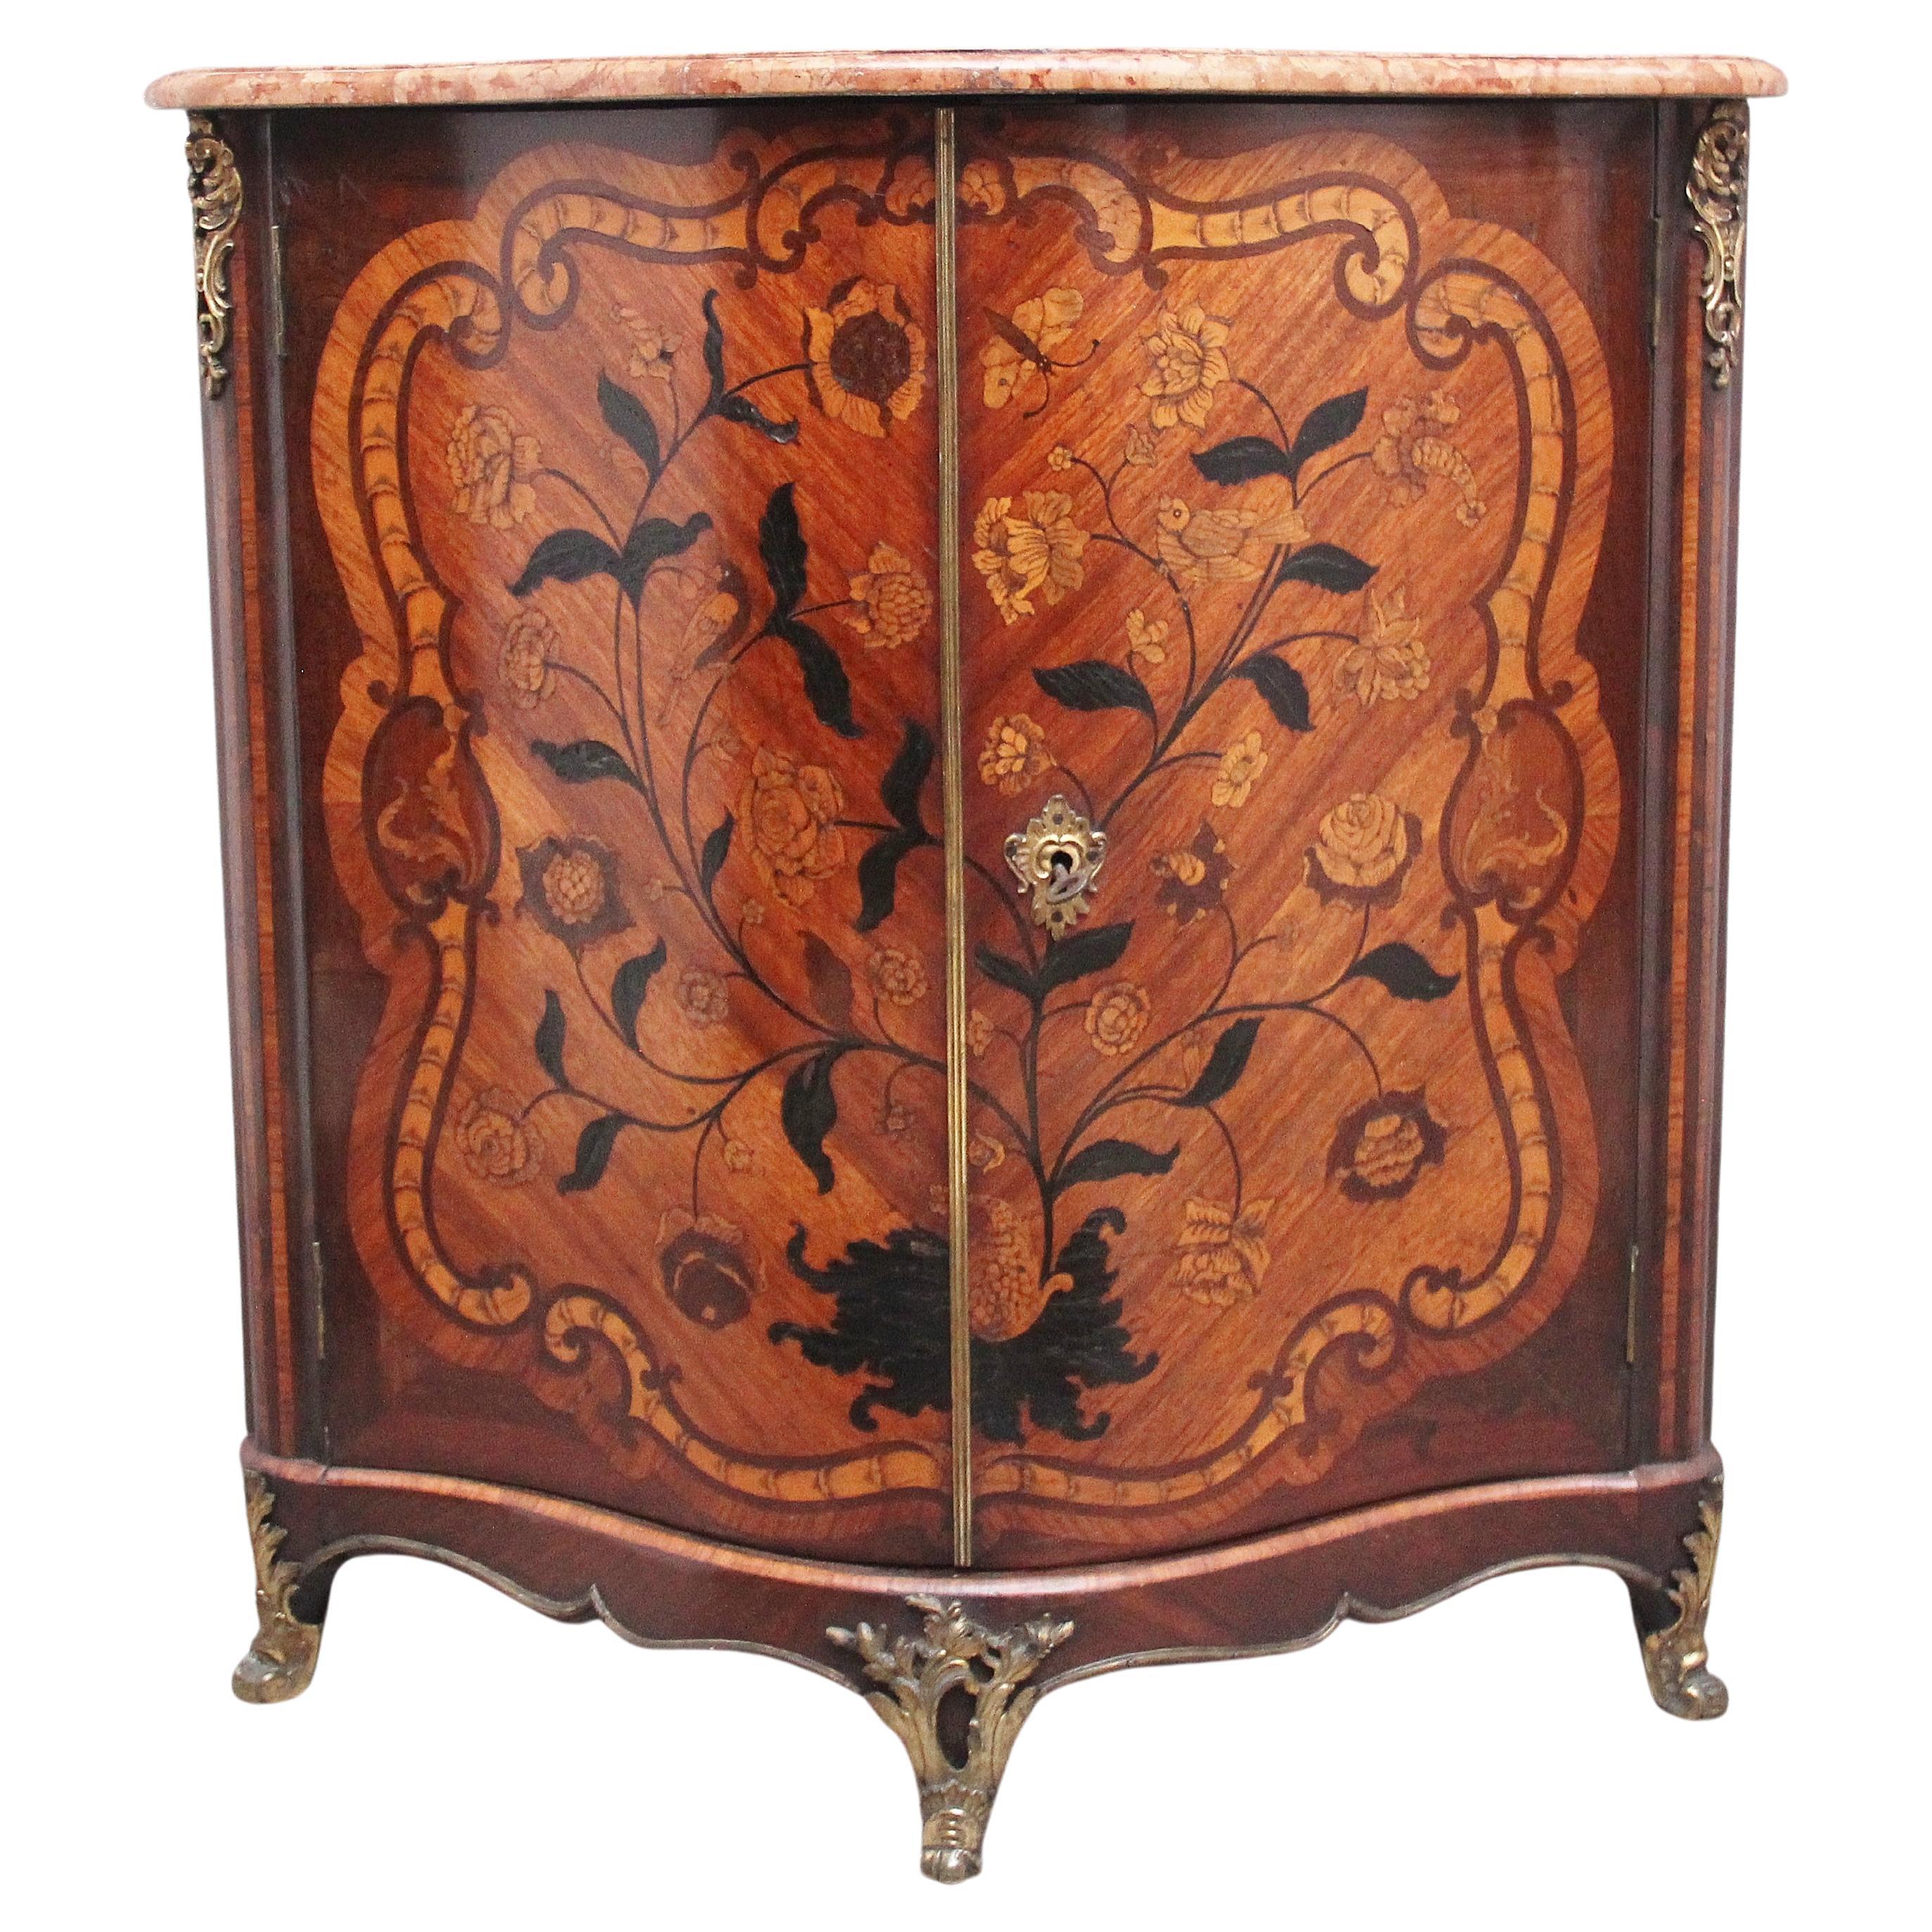 18th Century French Inlaid Tulipwood and Marble Top Corner Cupboard